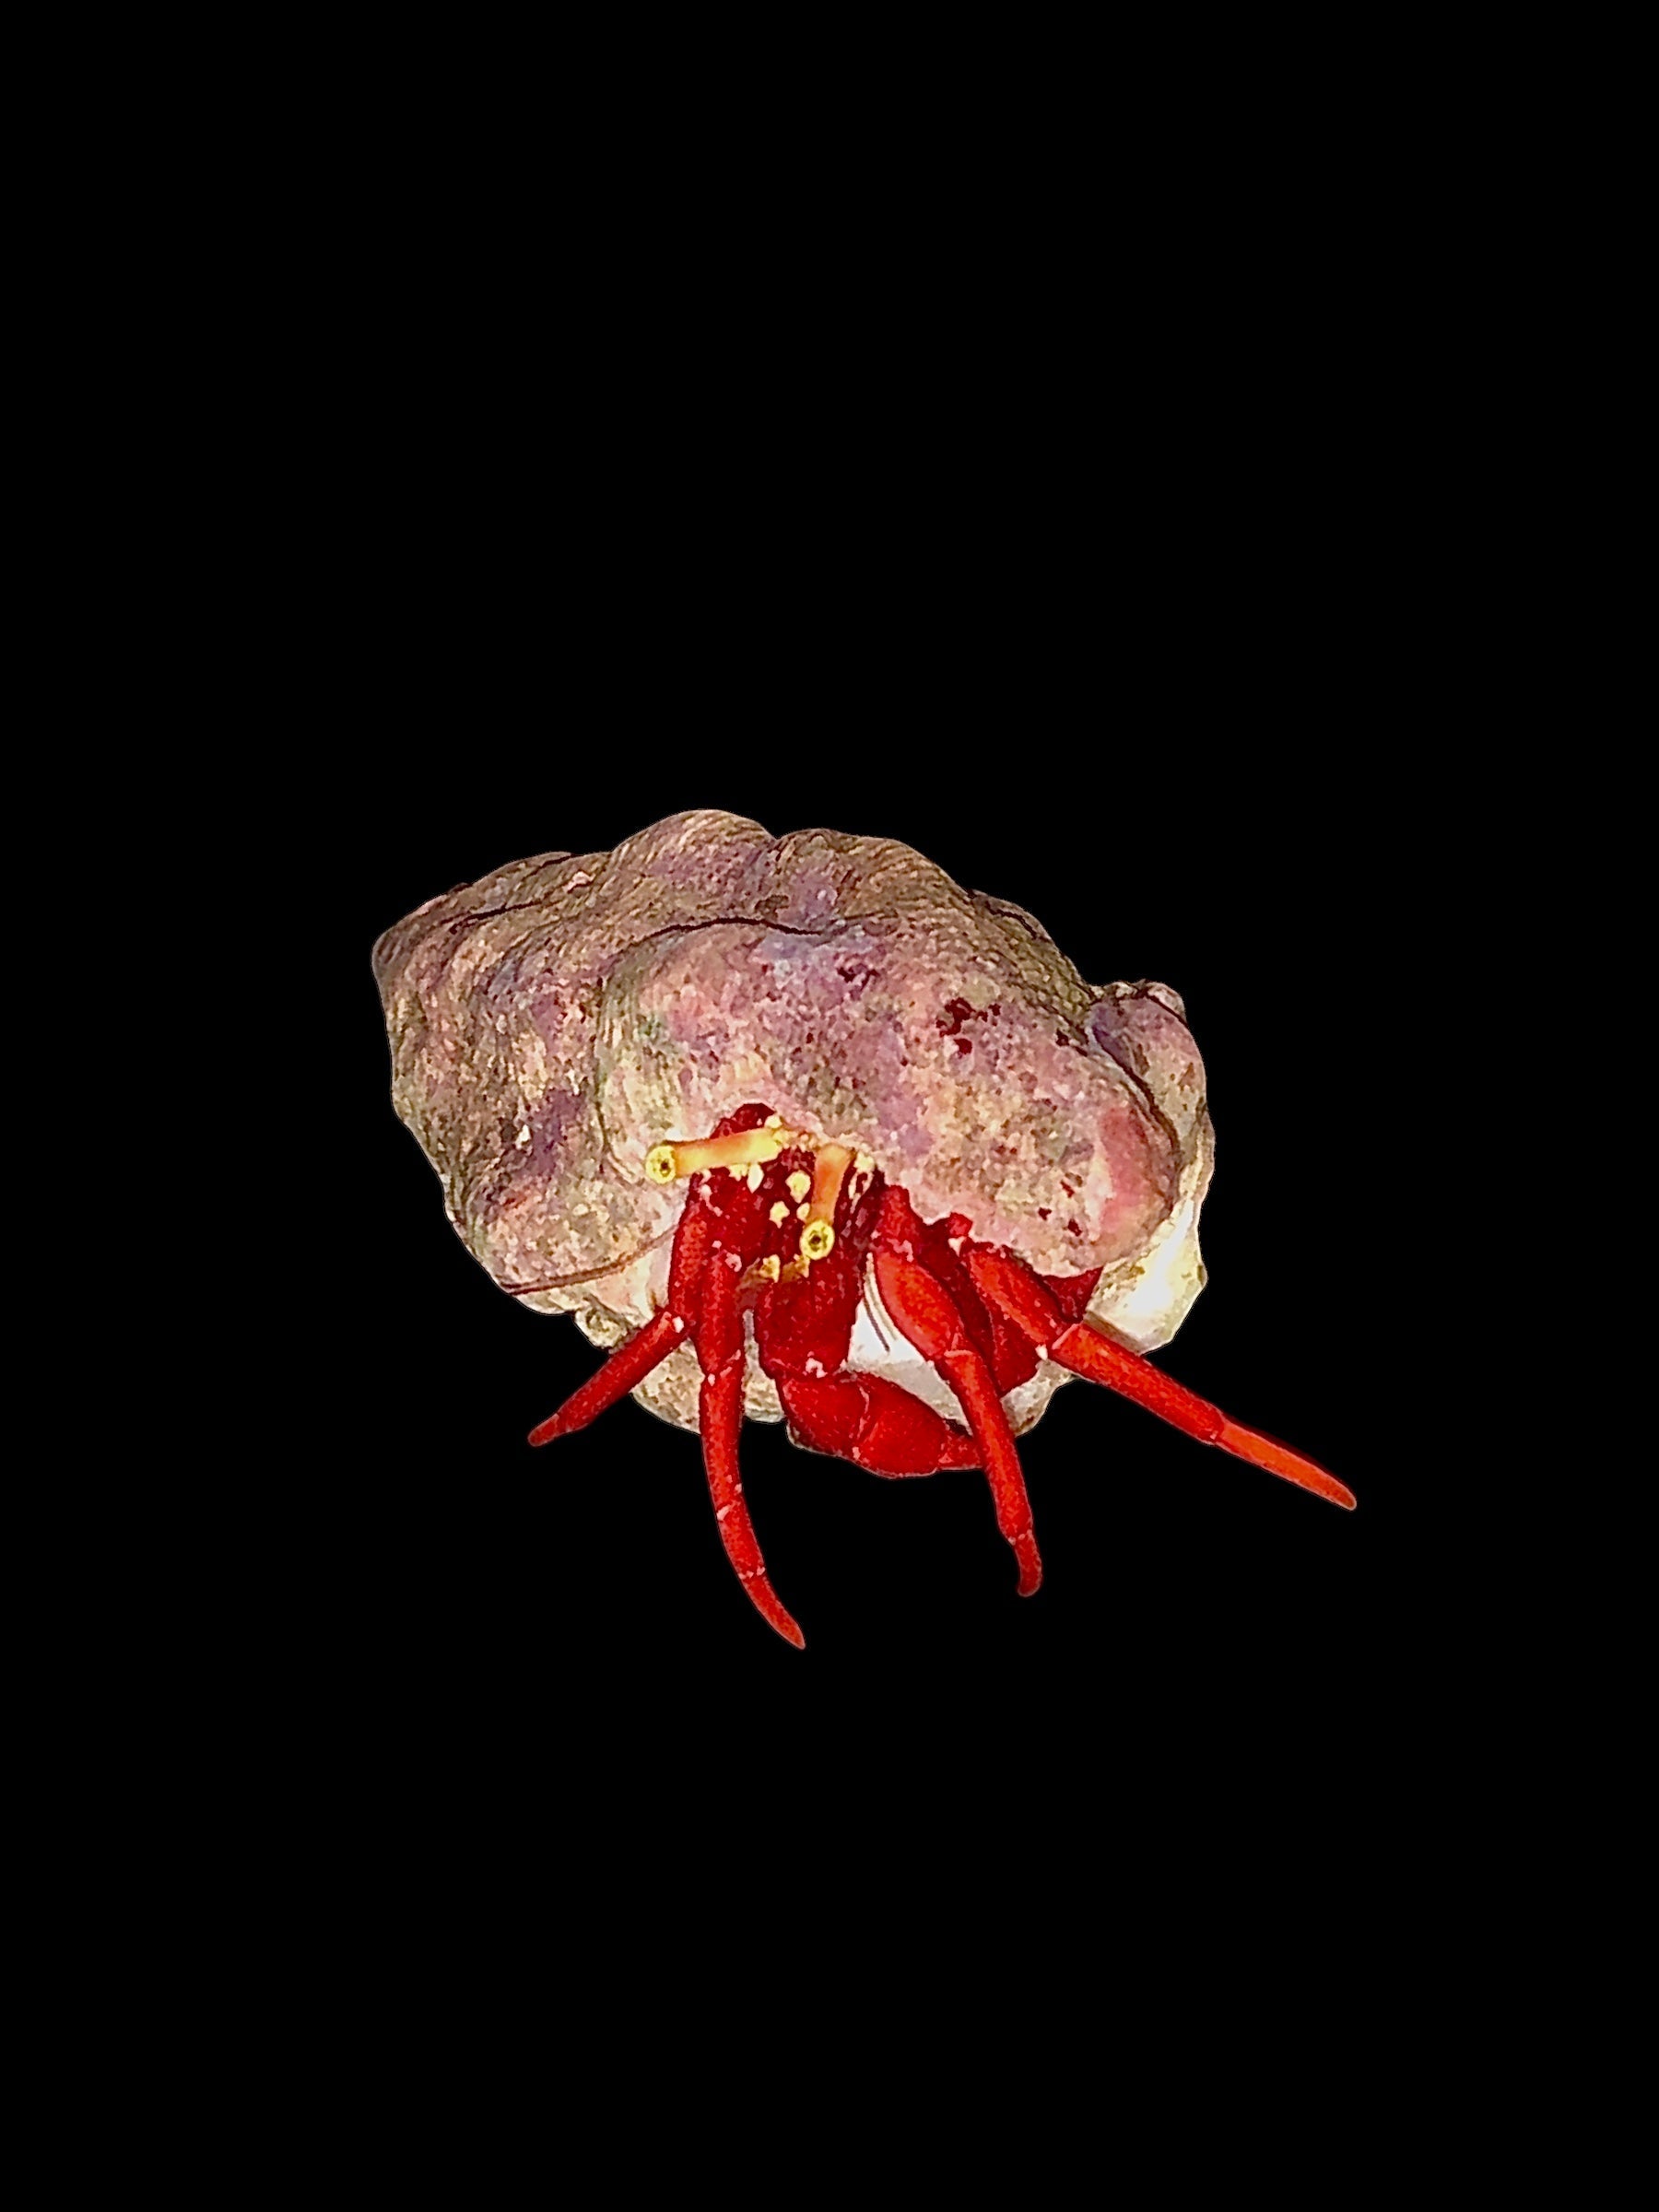 CYBER MONDAY SPECIAL-Scarlet Hermit Crab